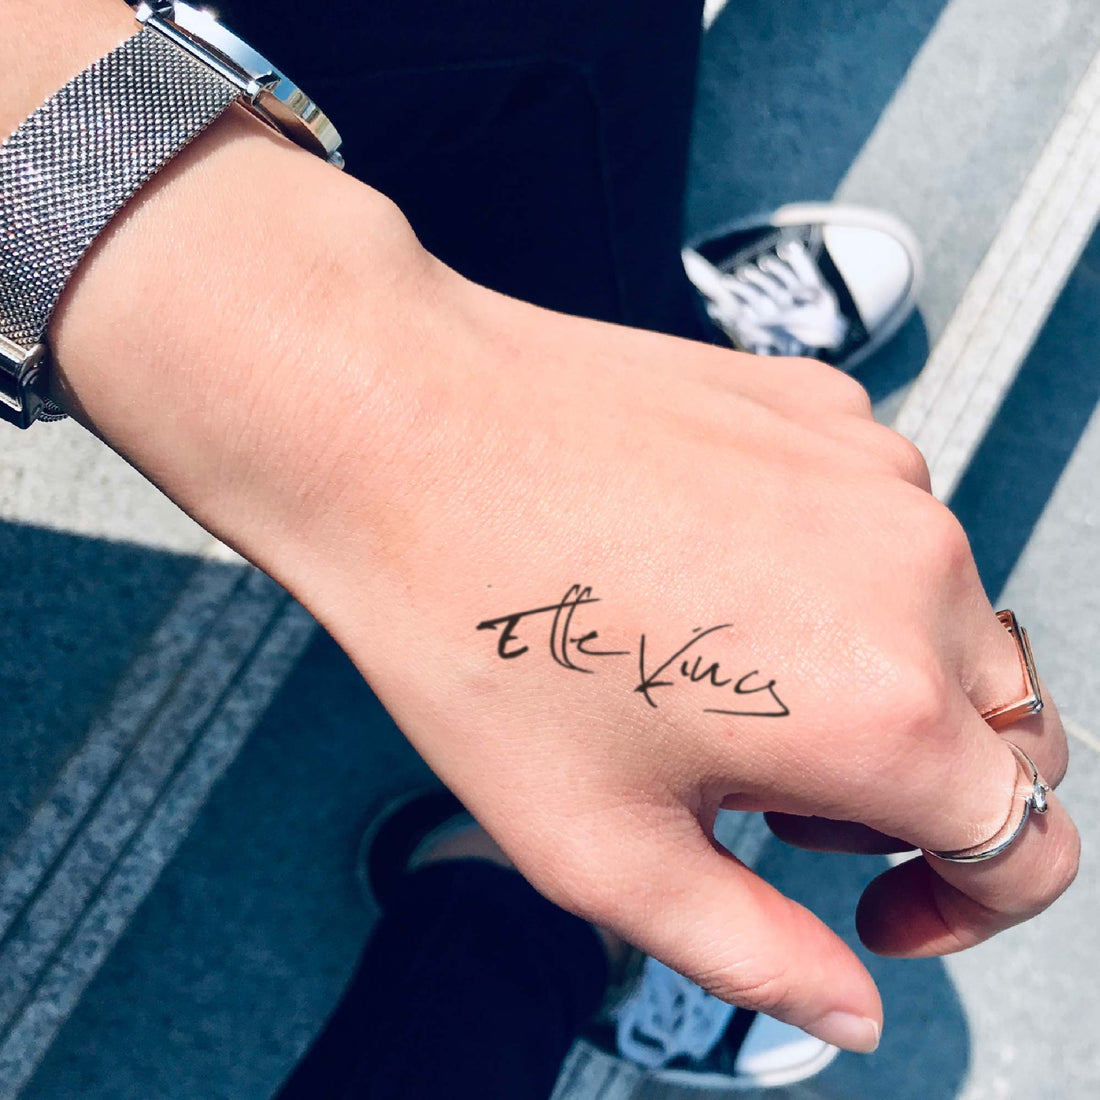 Elle King custom temporary tattoo sticker design idea inspiration meanings removal arm wrist hand words font name signature calligraphy lyrics tour concert outfits merch accessory gift souvenir costumes wear dress up code